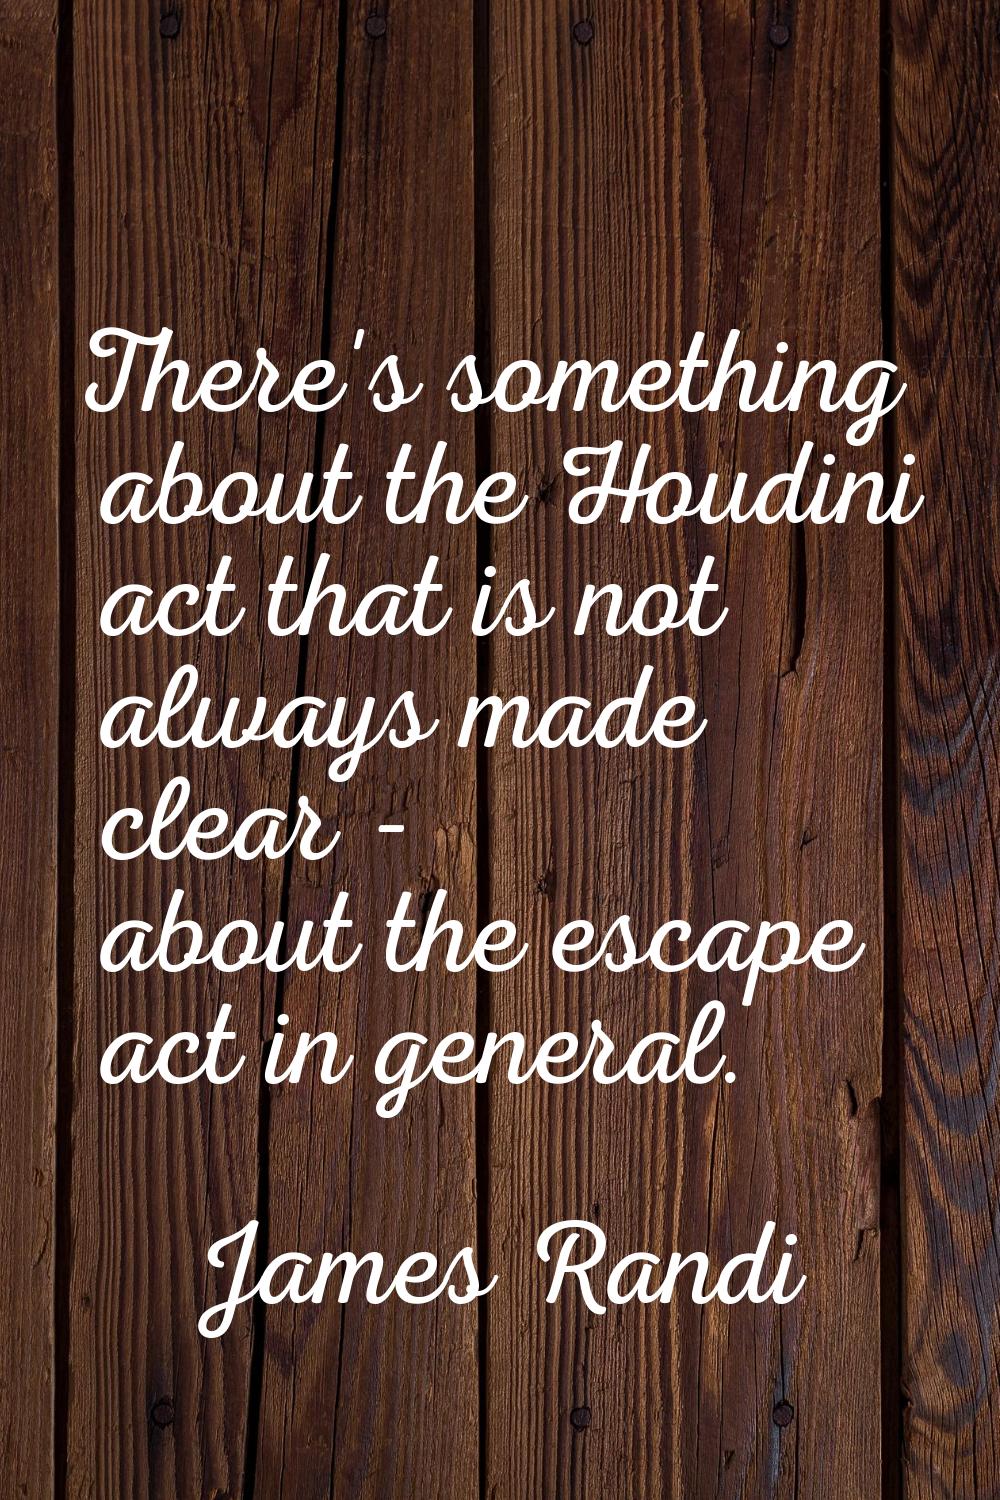 There's something about the Houdini act that is not always made clear - about the escape act in gen